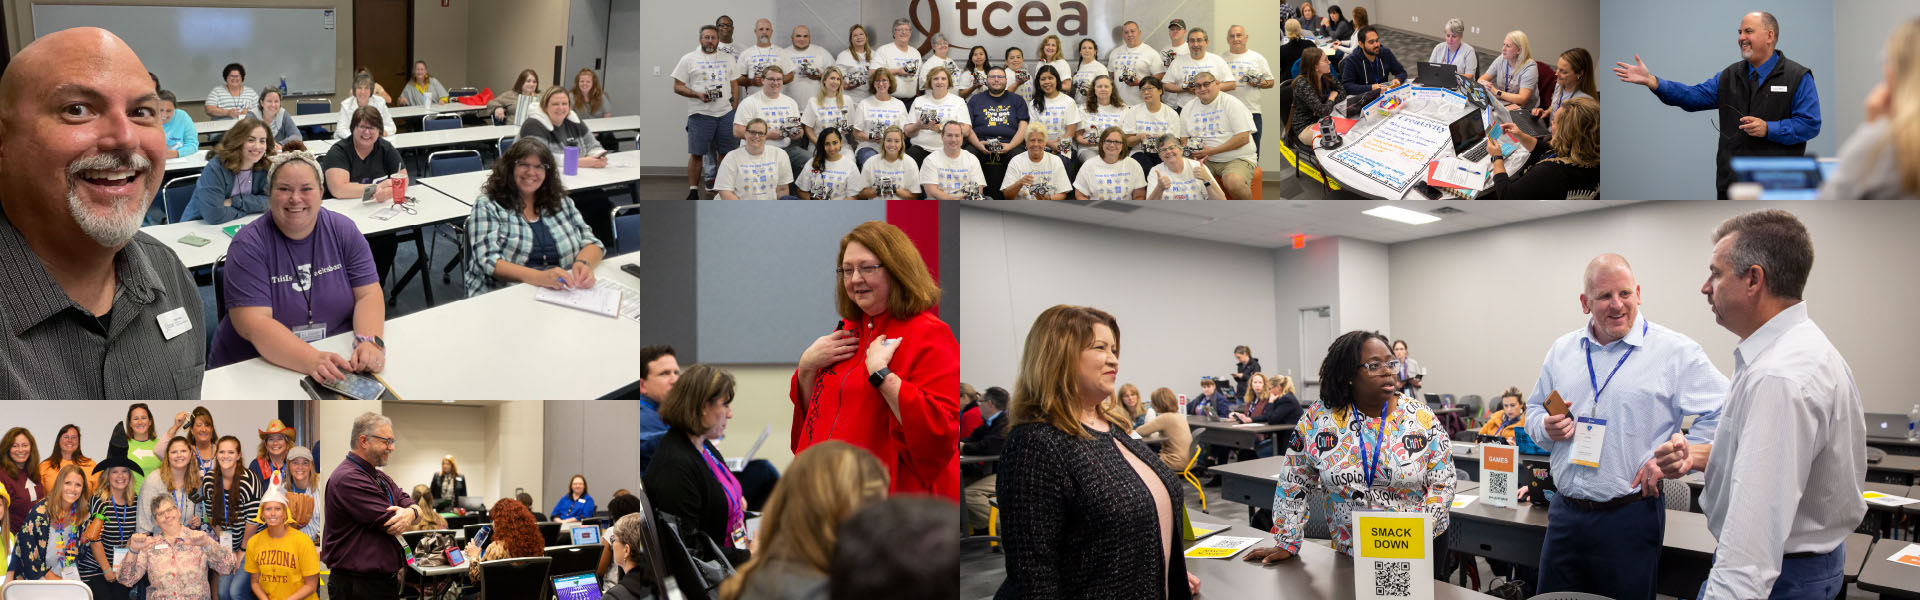 TCEA Professional Development Team and Services